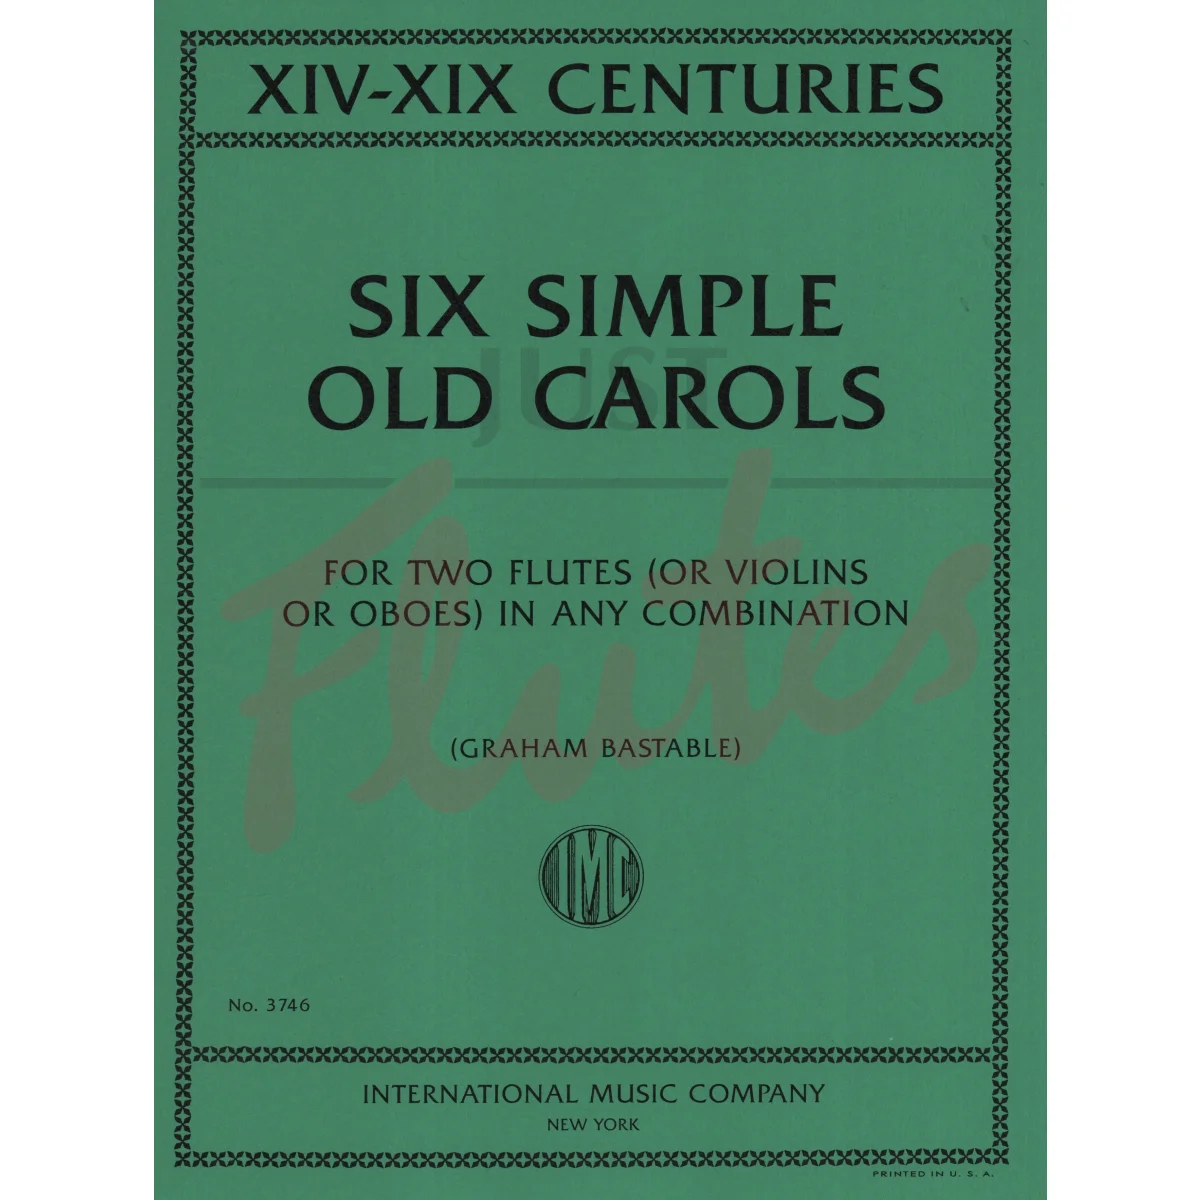 Six Simple Old Carols for Two Flutes/Violins/Oboes